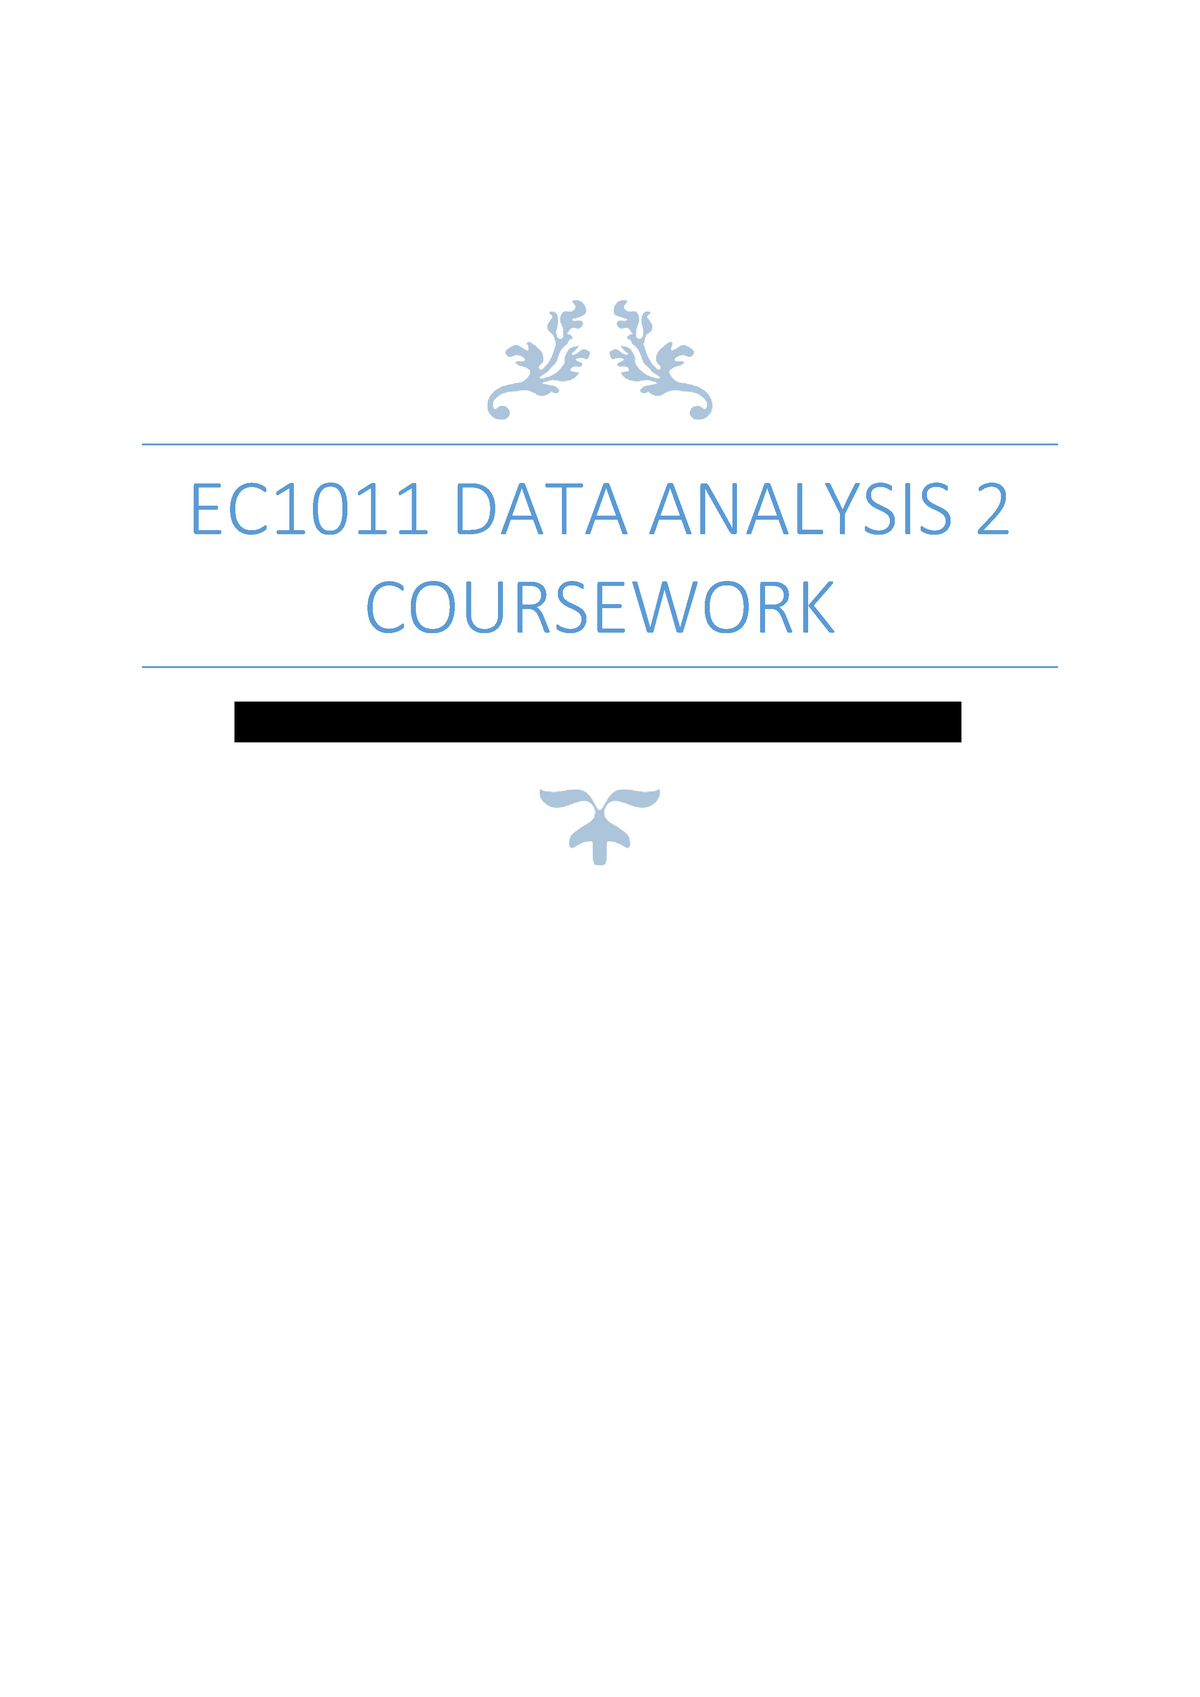 coursework for data analysis